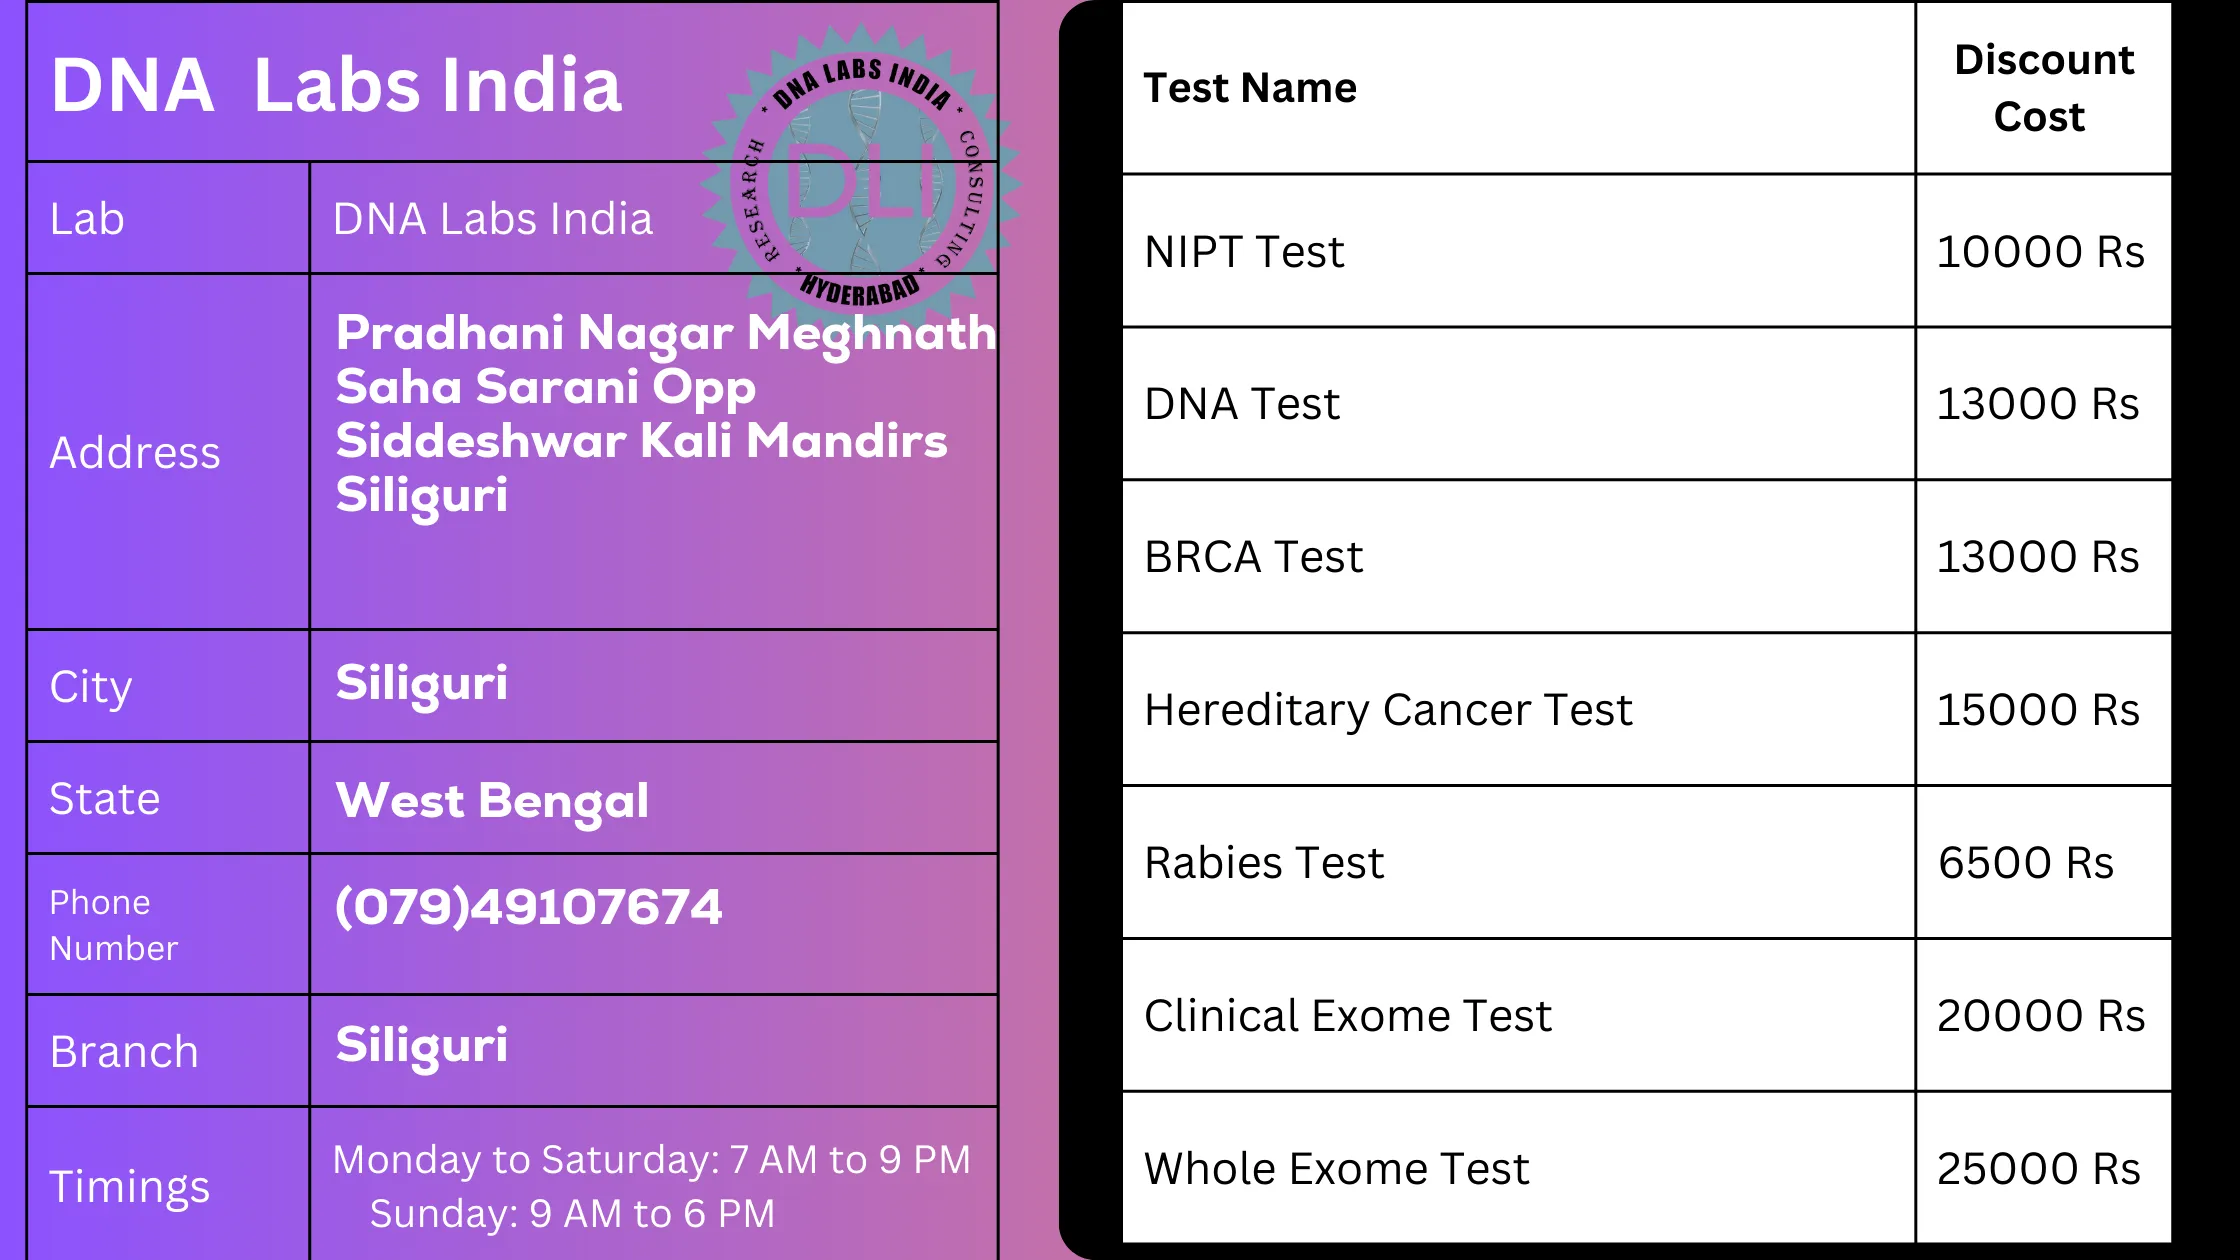 DNA Labs India in Siliguri: Your Trusted Partner for Genetic Testing